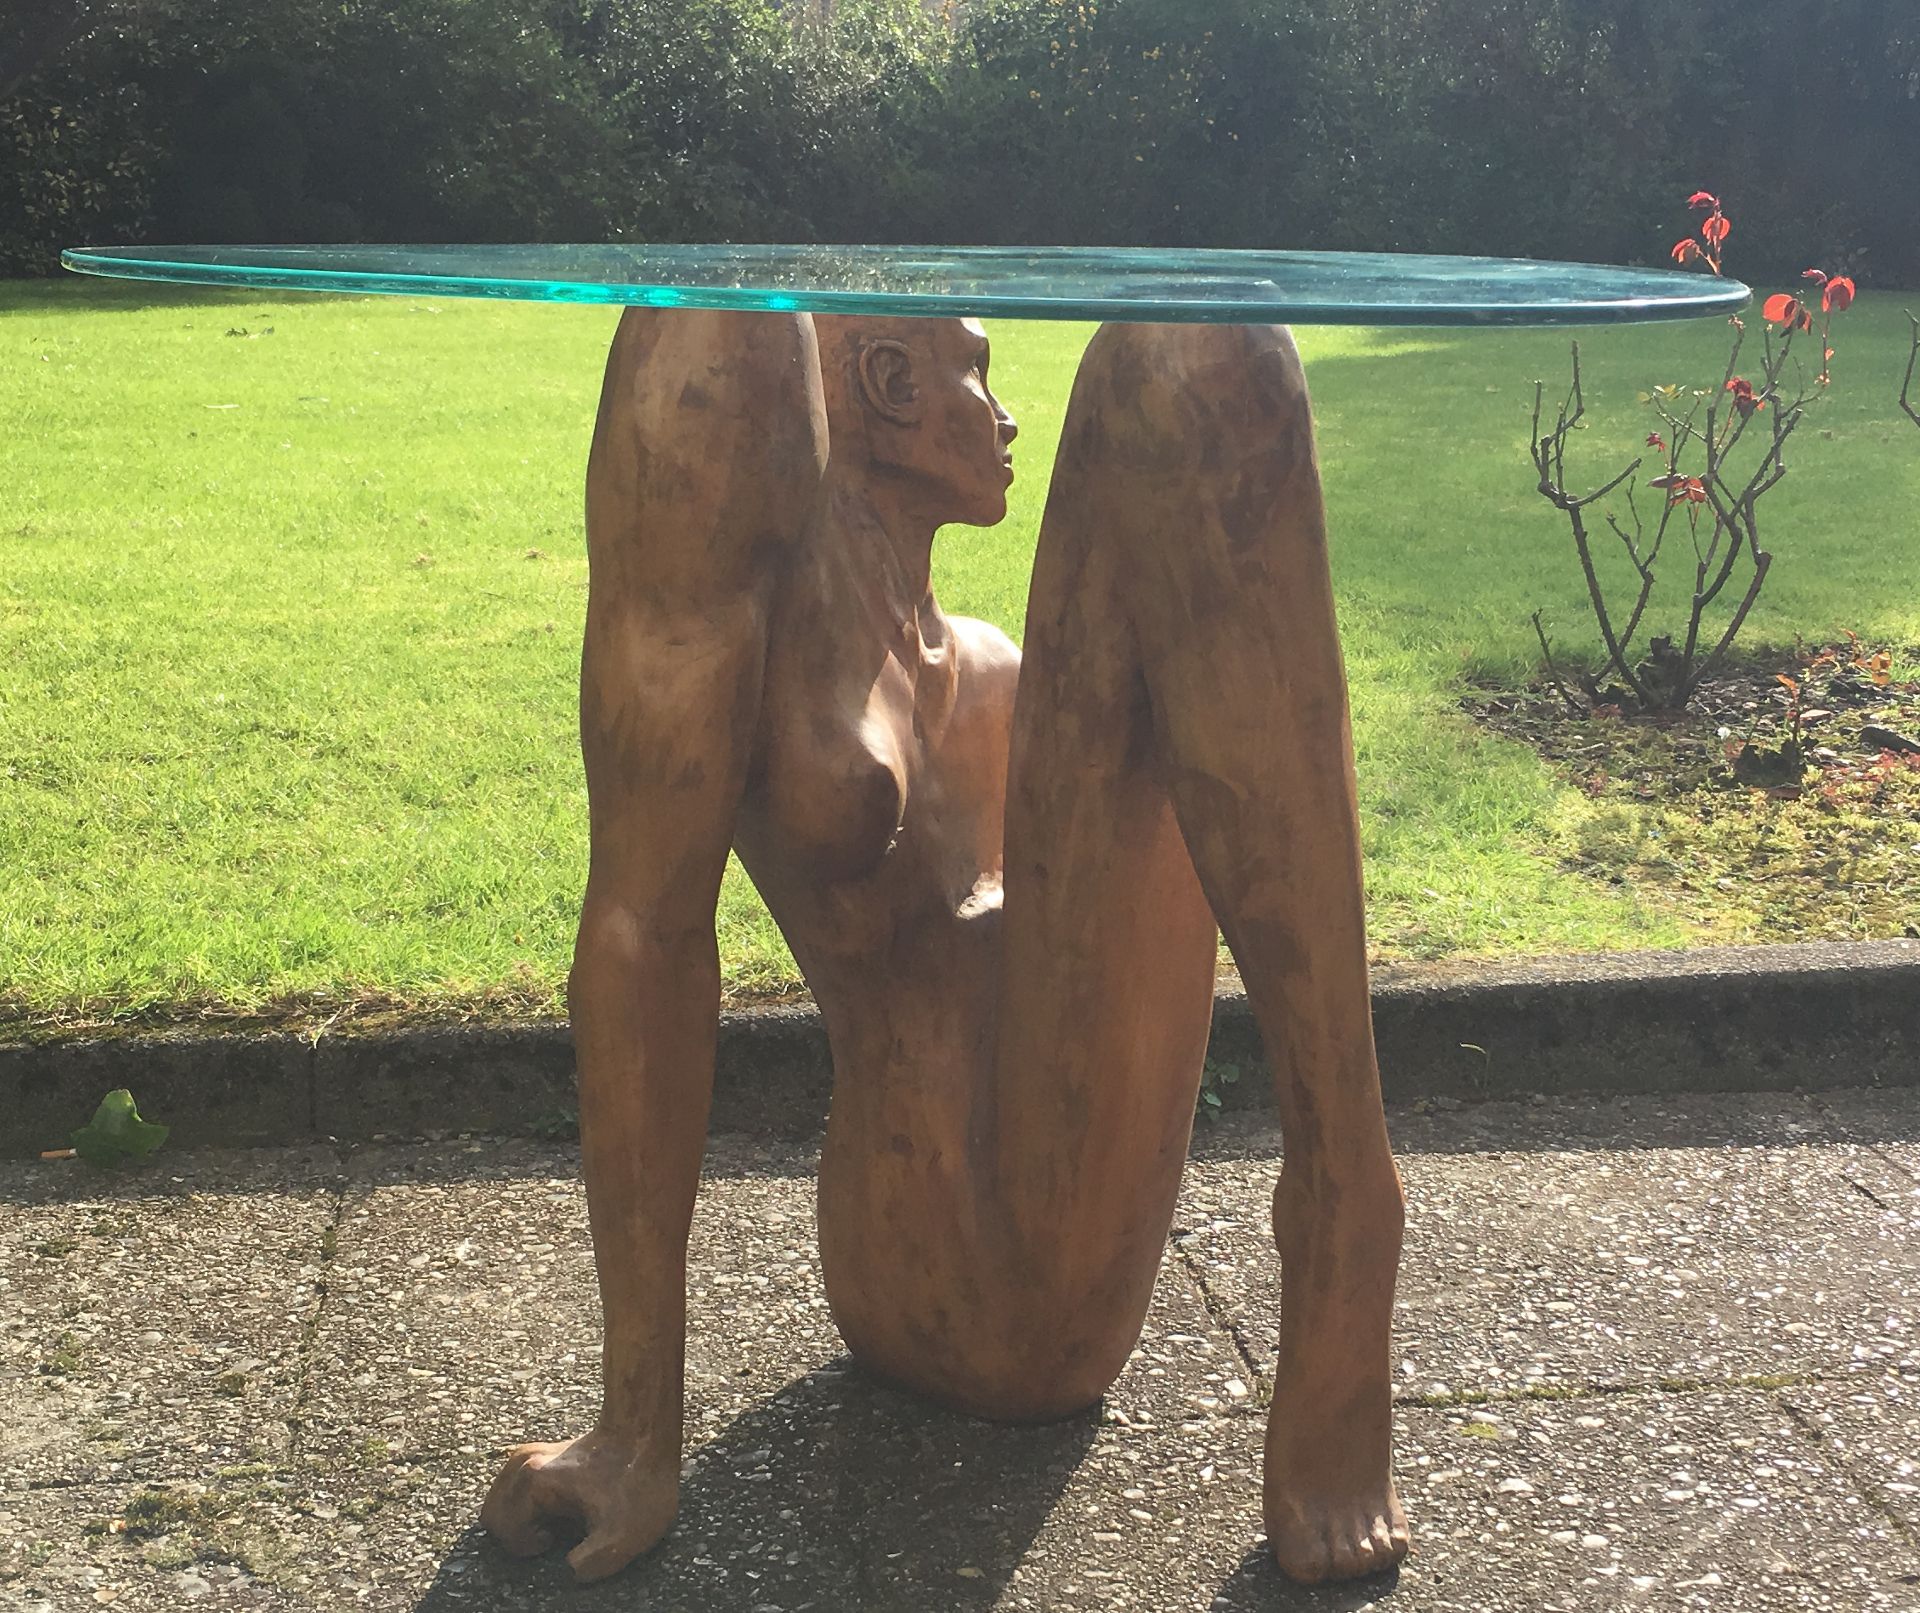 Carved Wood figurative sculptural table, 76 x 54 cms, with rounded triangular glass top - Image 6 of 12